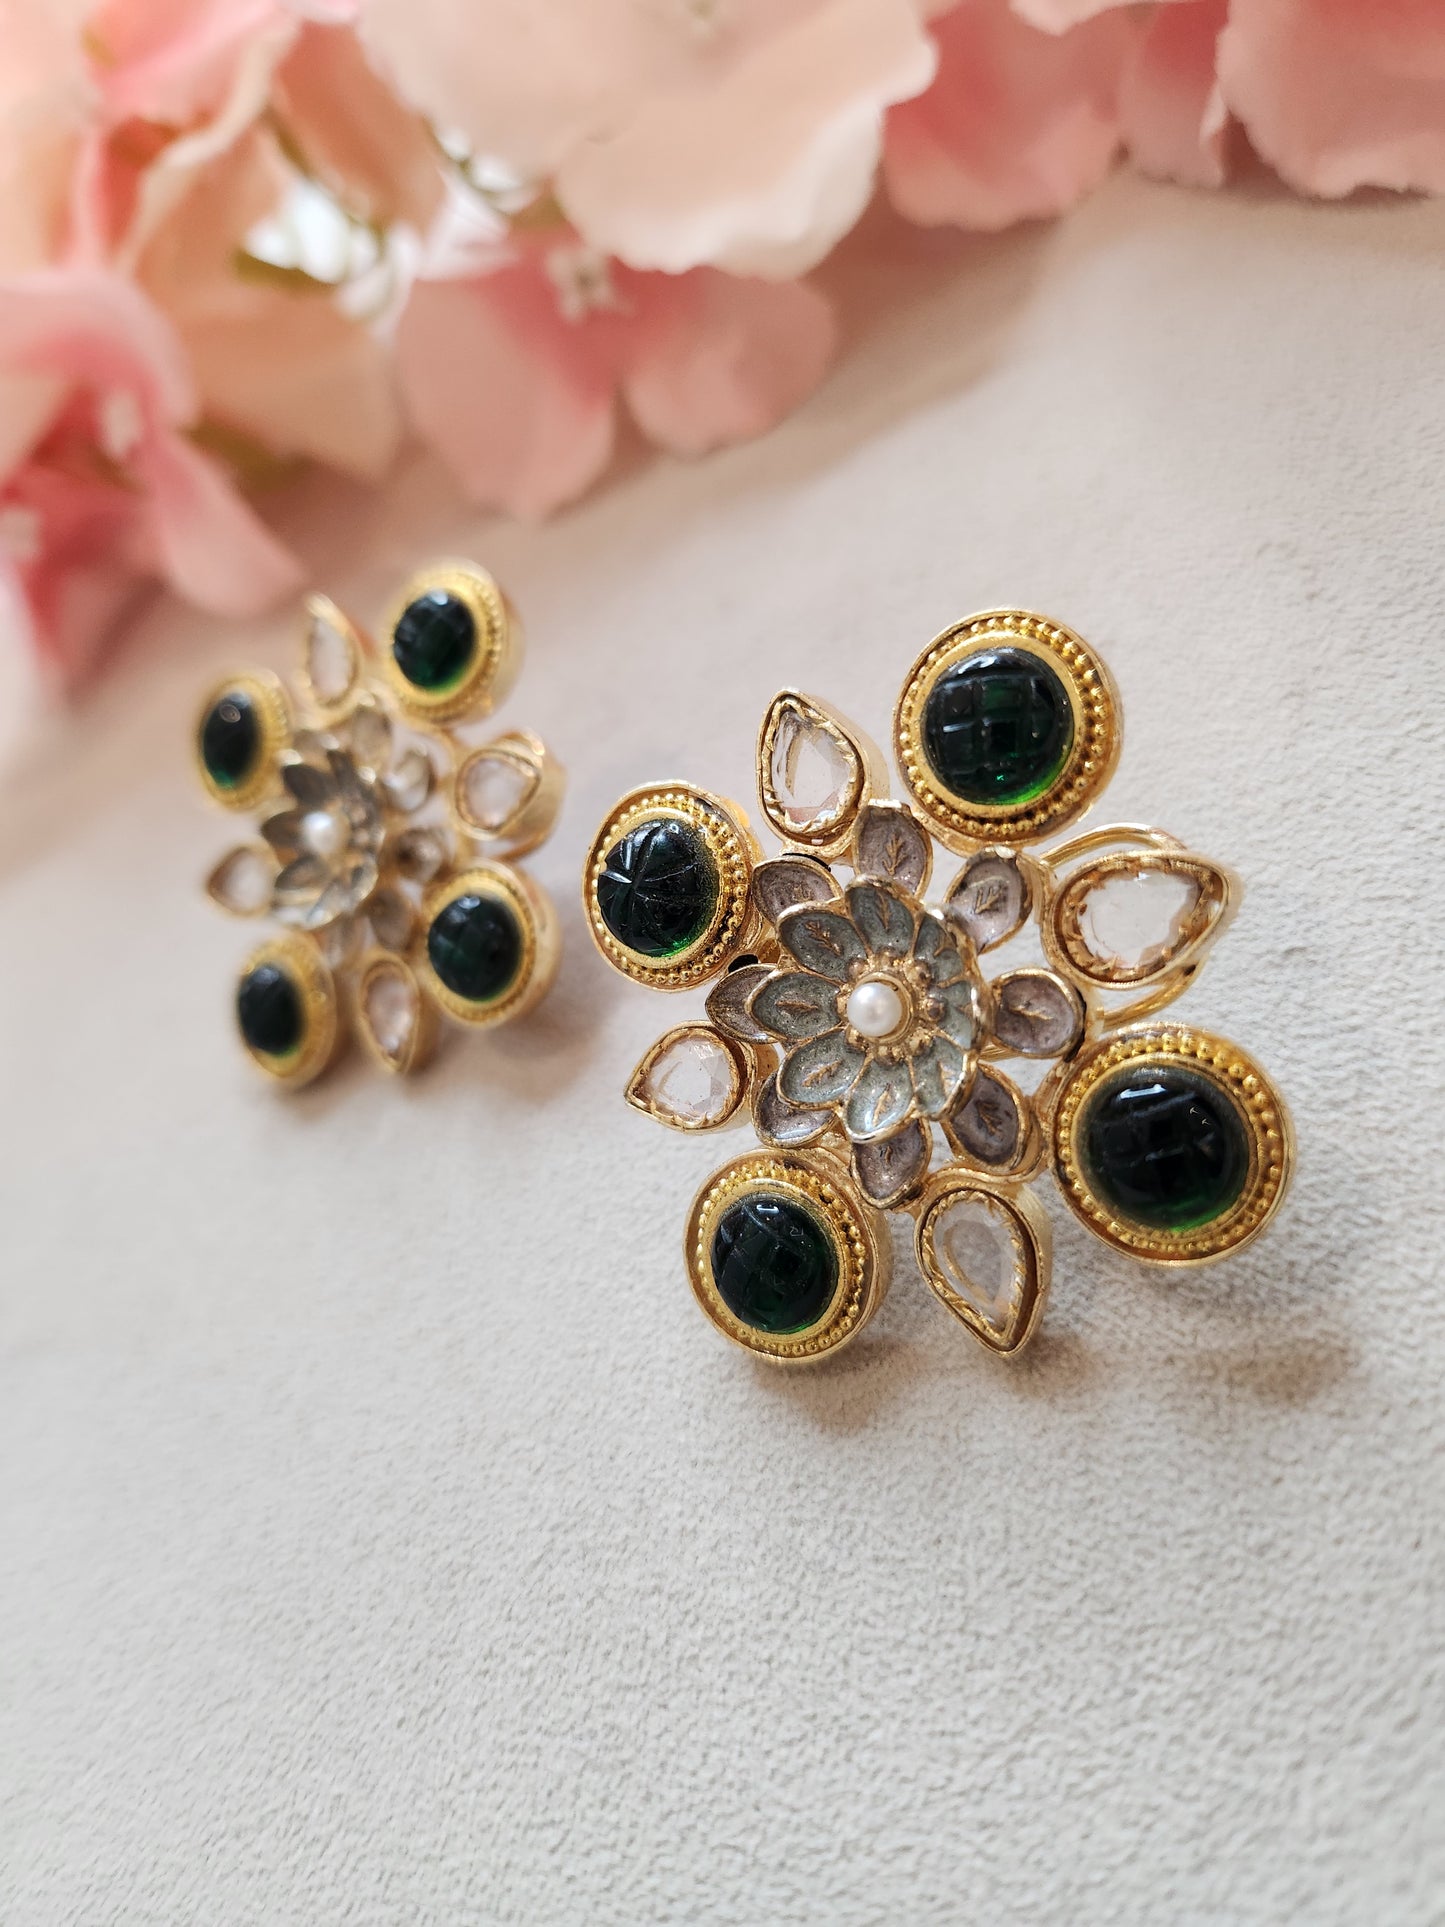 THE BUTTERFLY EFFECT JEWELRY - Meena square flower studs with quartz